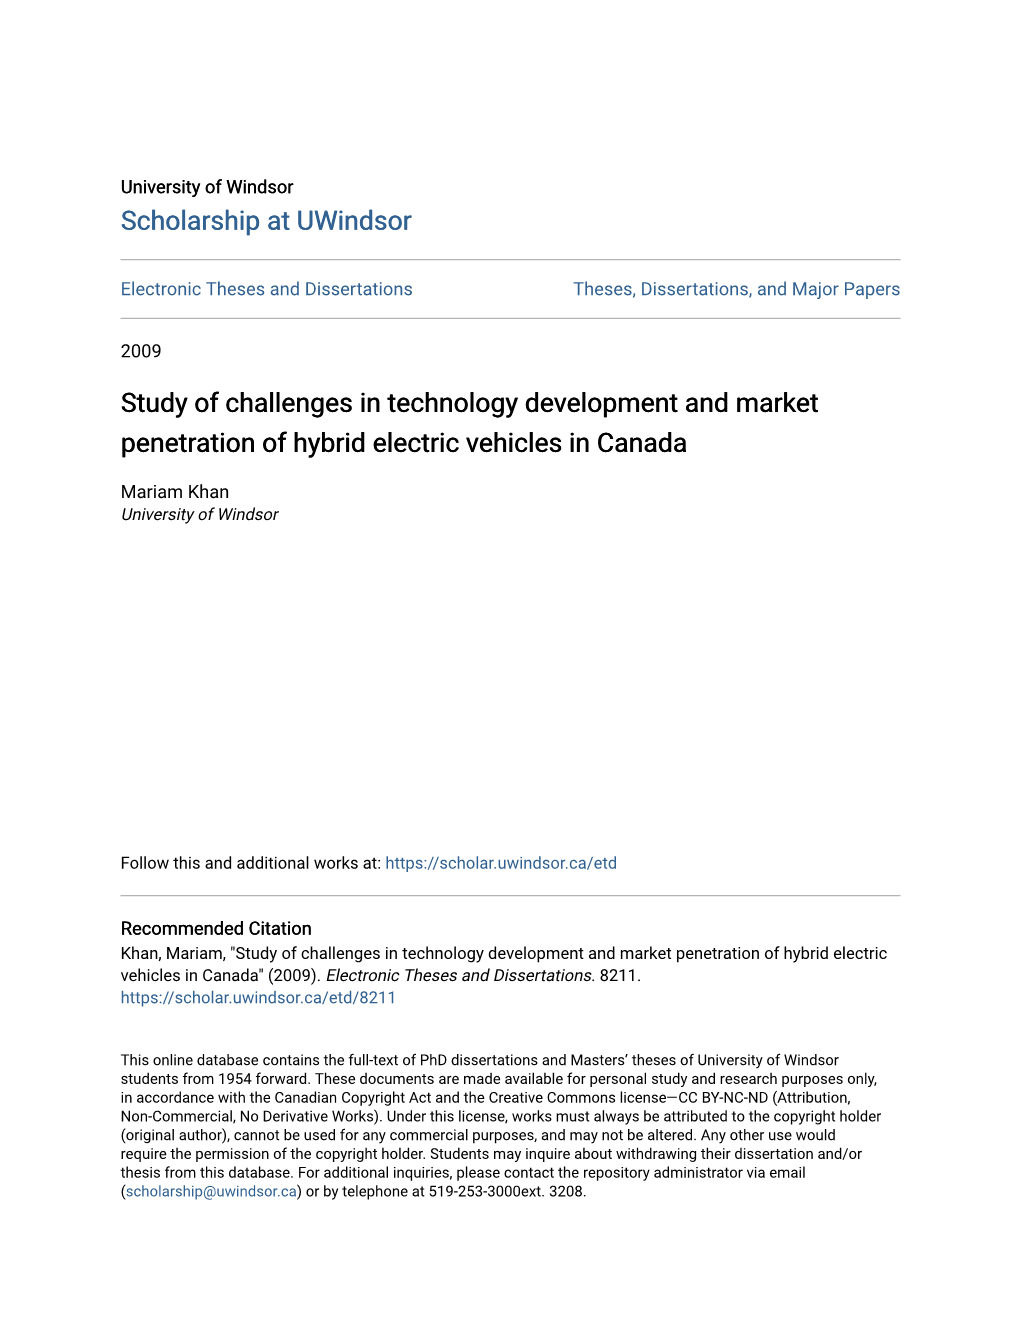 Study of Challenges in Technology Development and Market Penetration of Hybrid Electric Vehicles in Canada